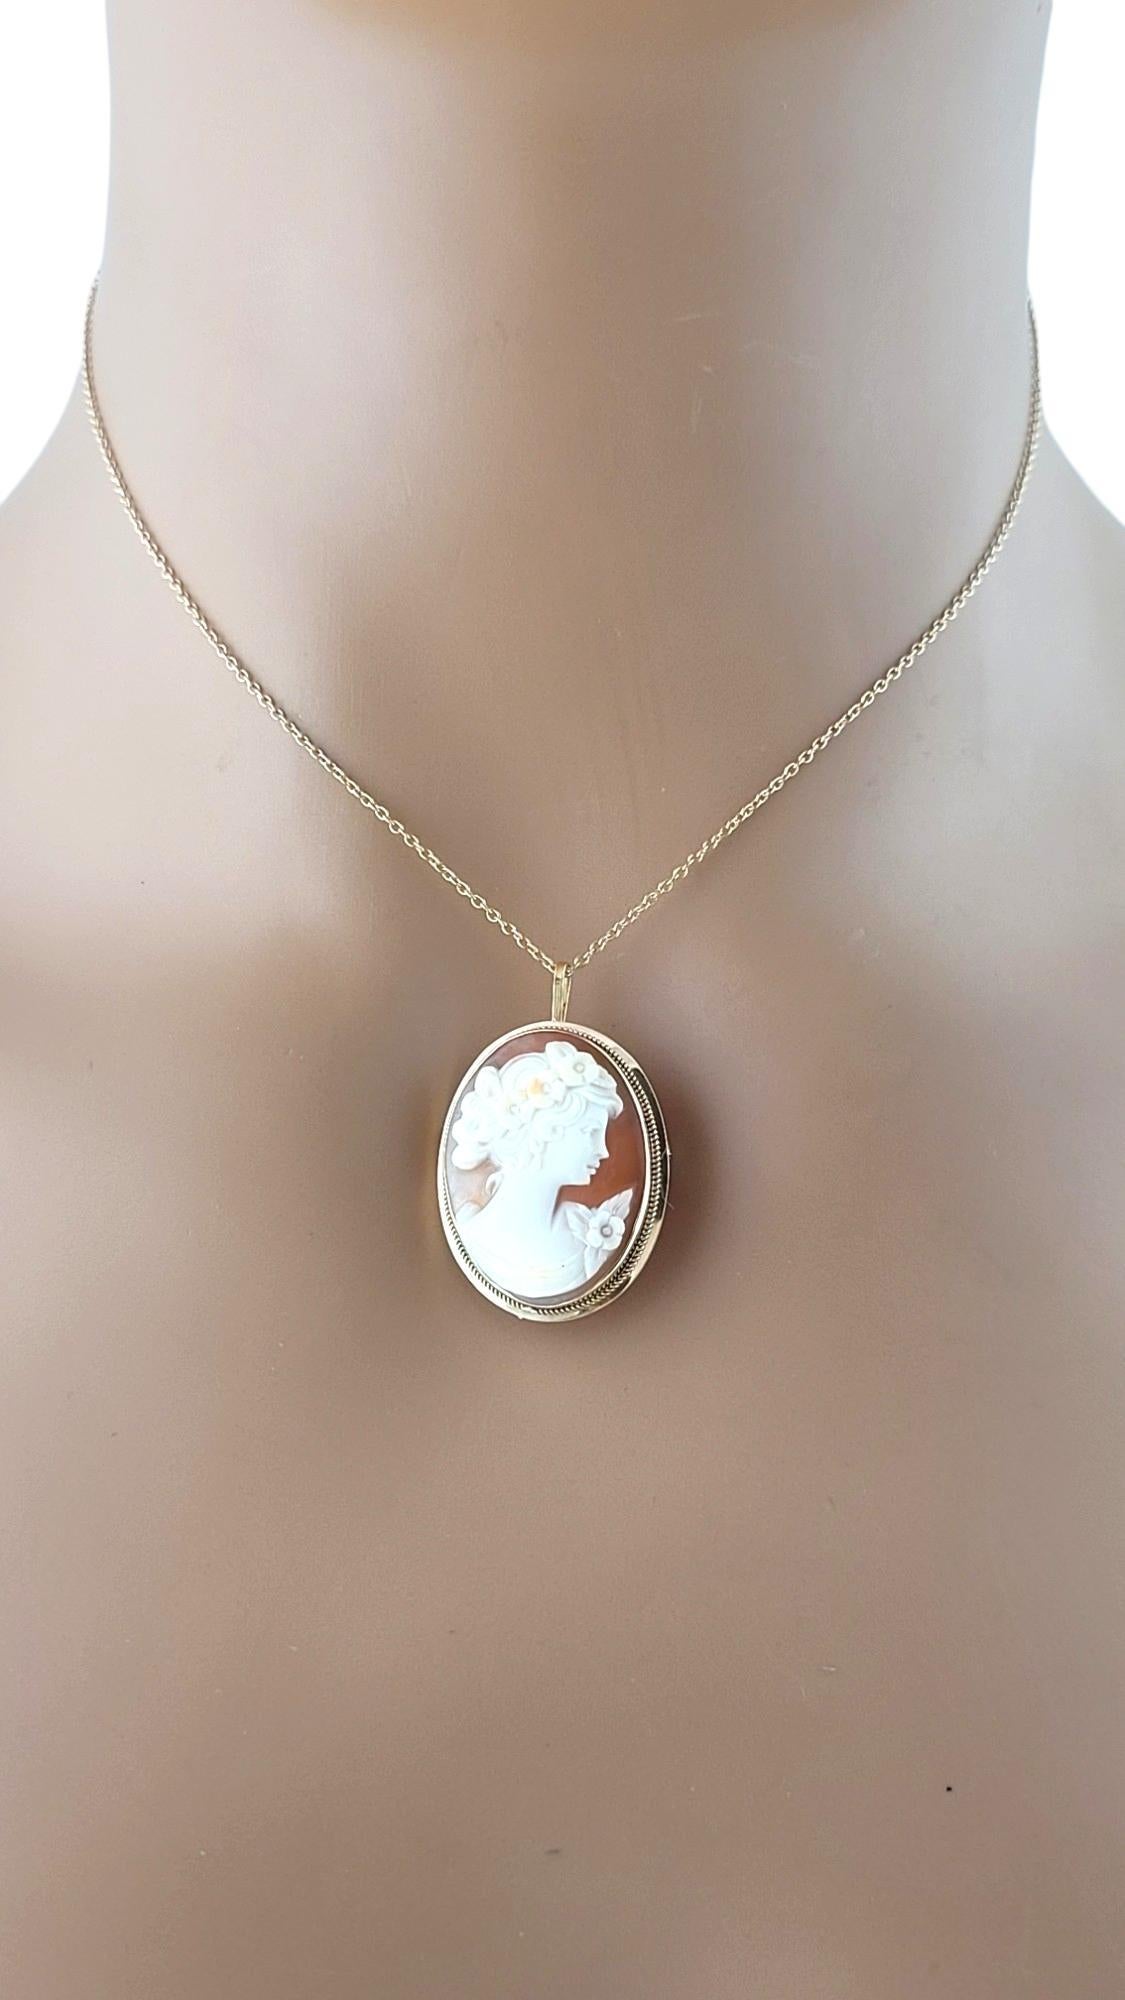 Vintage 18K Yellow Gold Cameo Pendant/Brooch #17373 For Sale 4